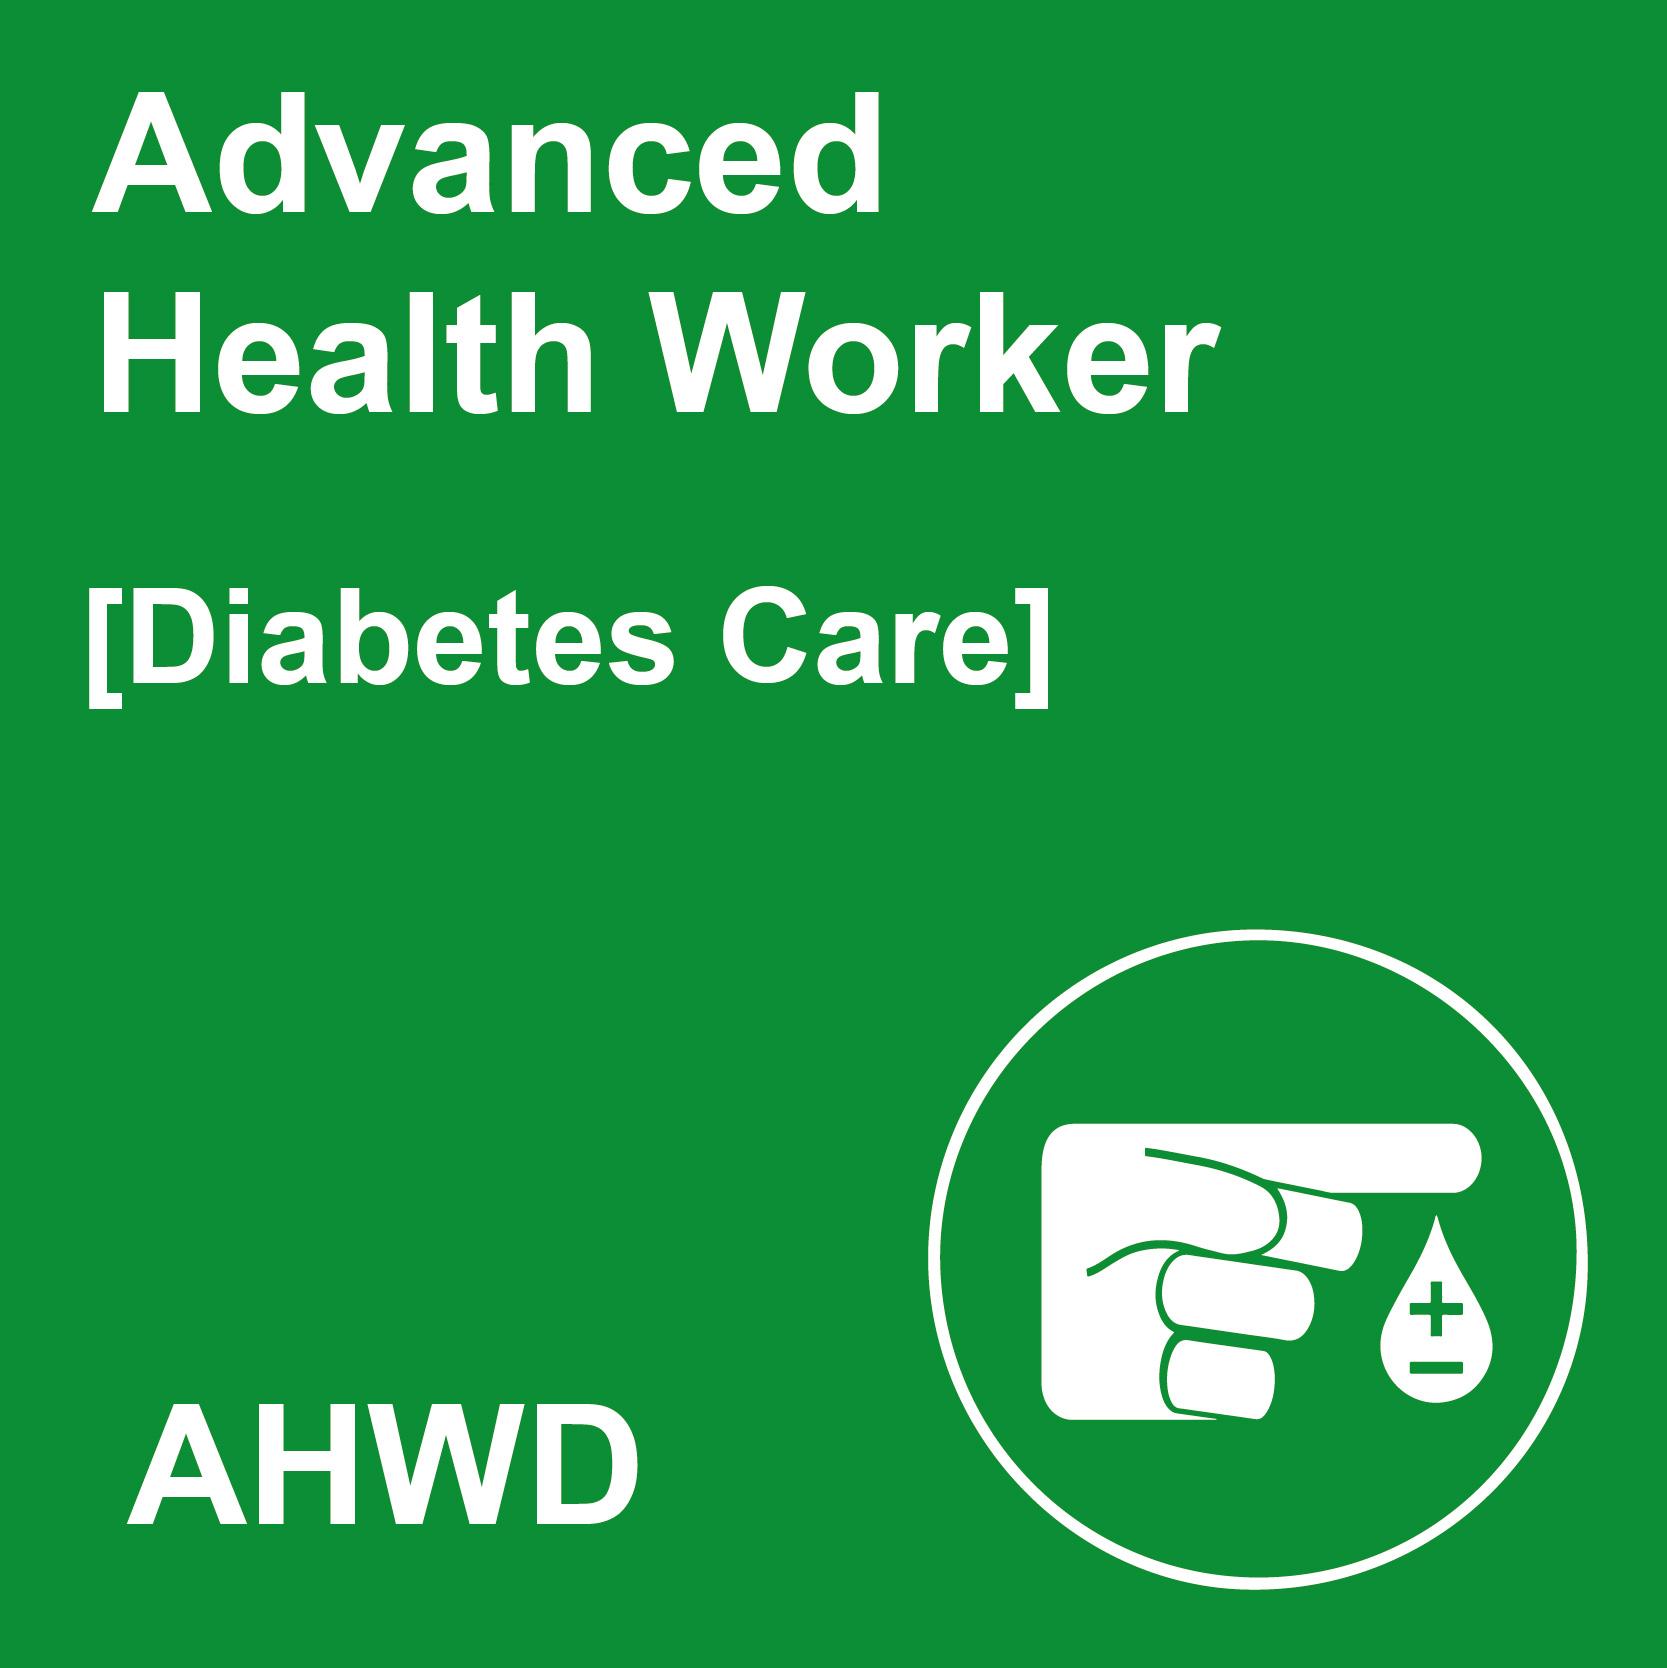 Advanced Health Worker Training Course (Diabetes Care)